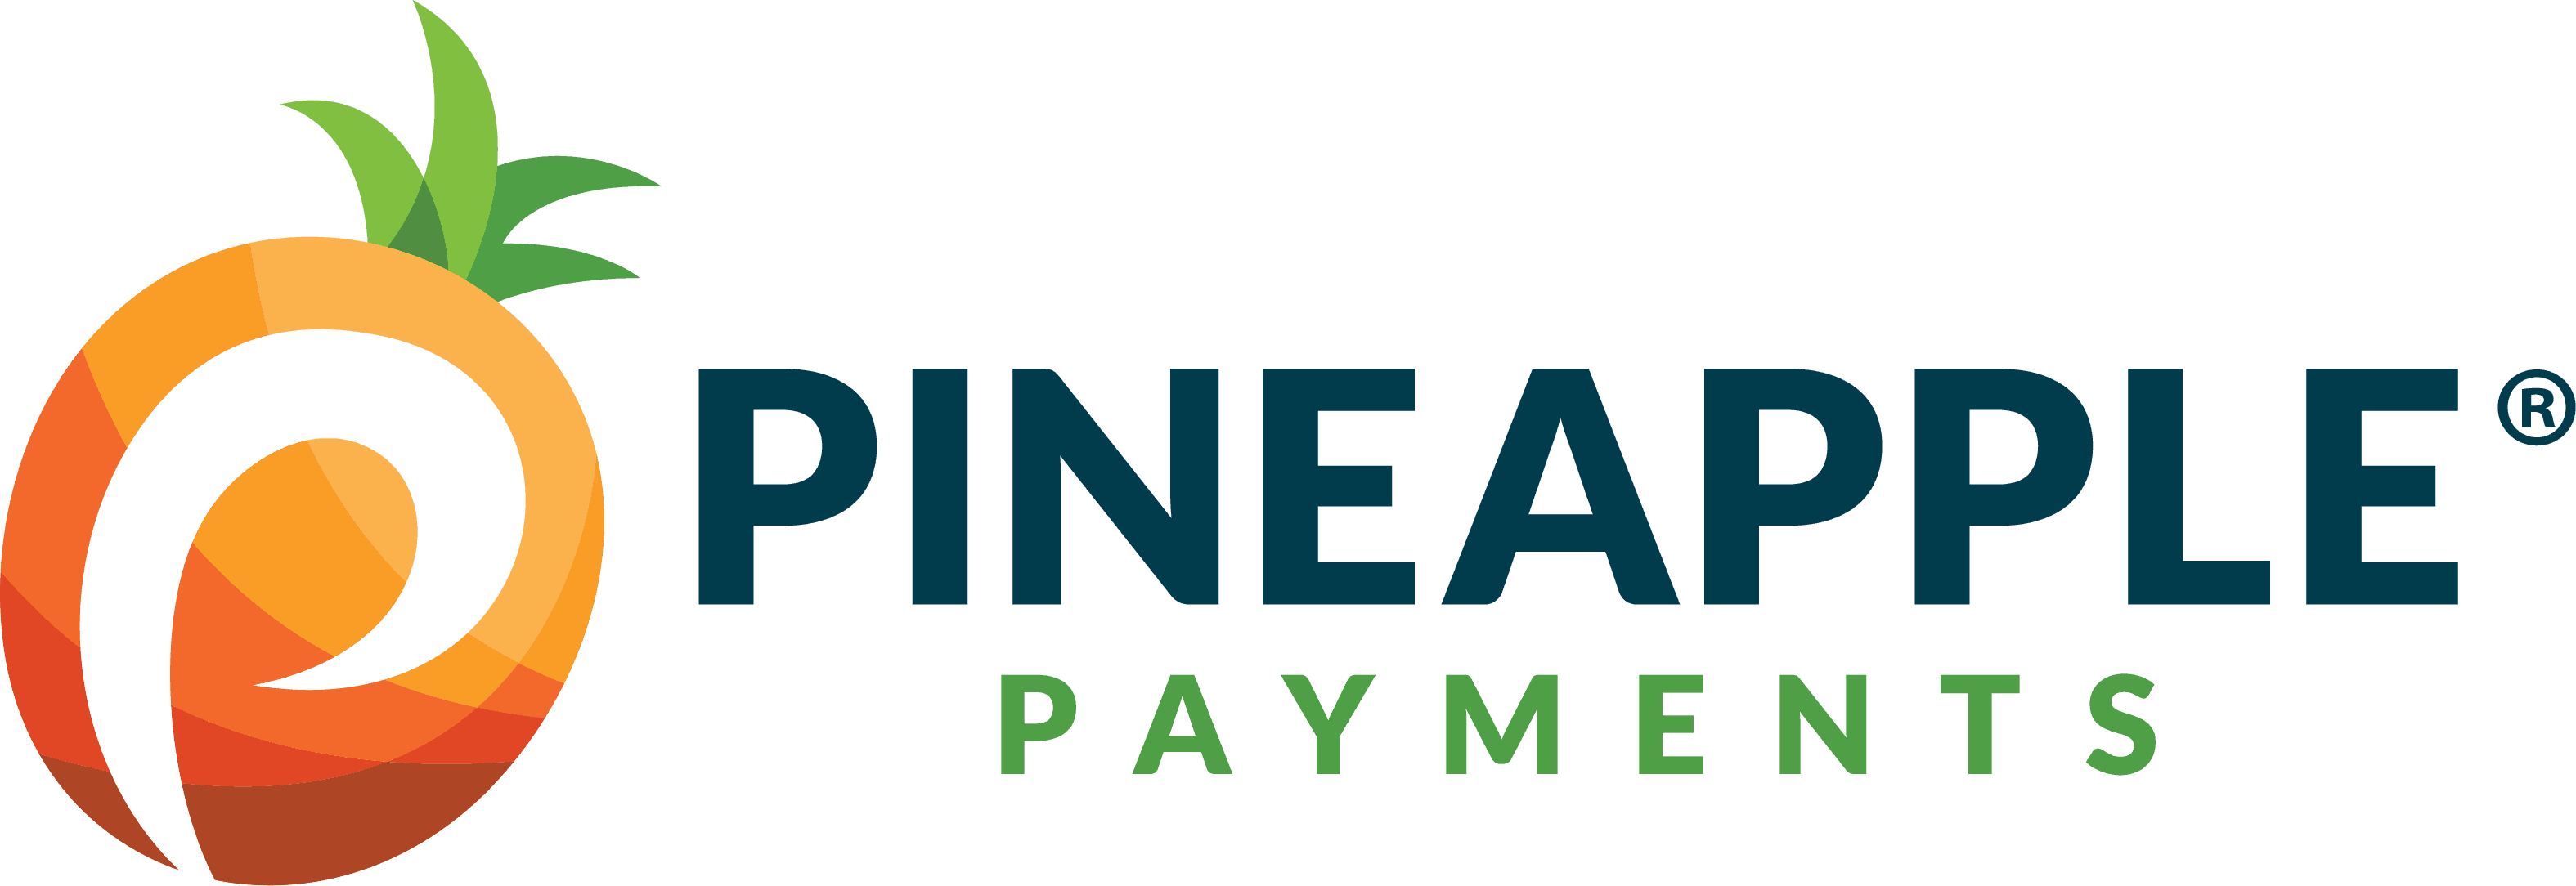 Pineapple Payments logo. It features Pineapple Payment's lettermark with a custom pineapple logo graphic.